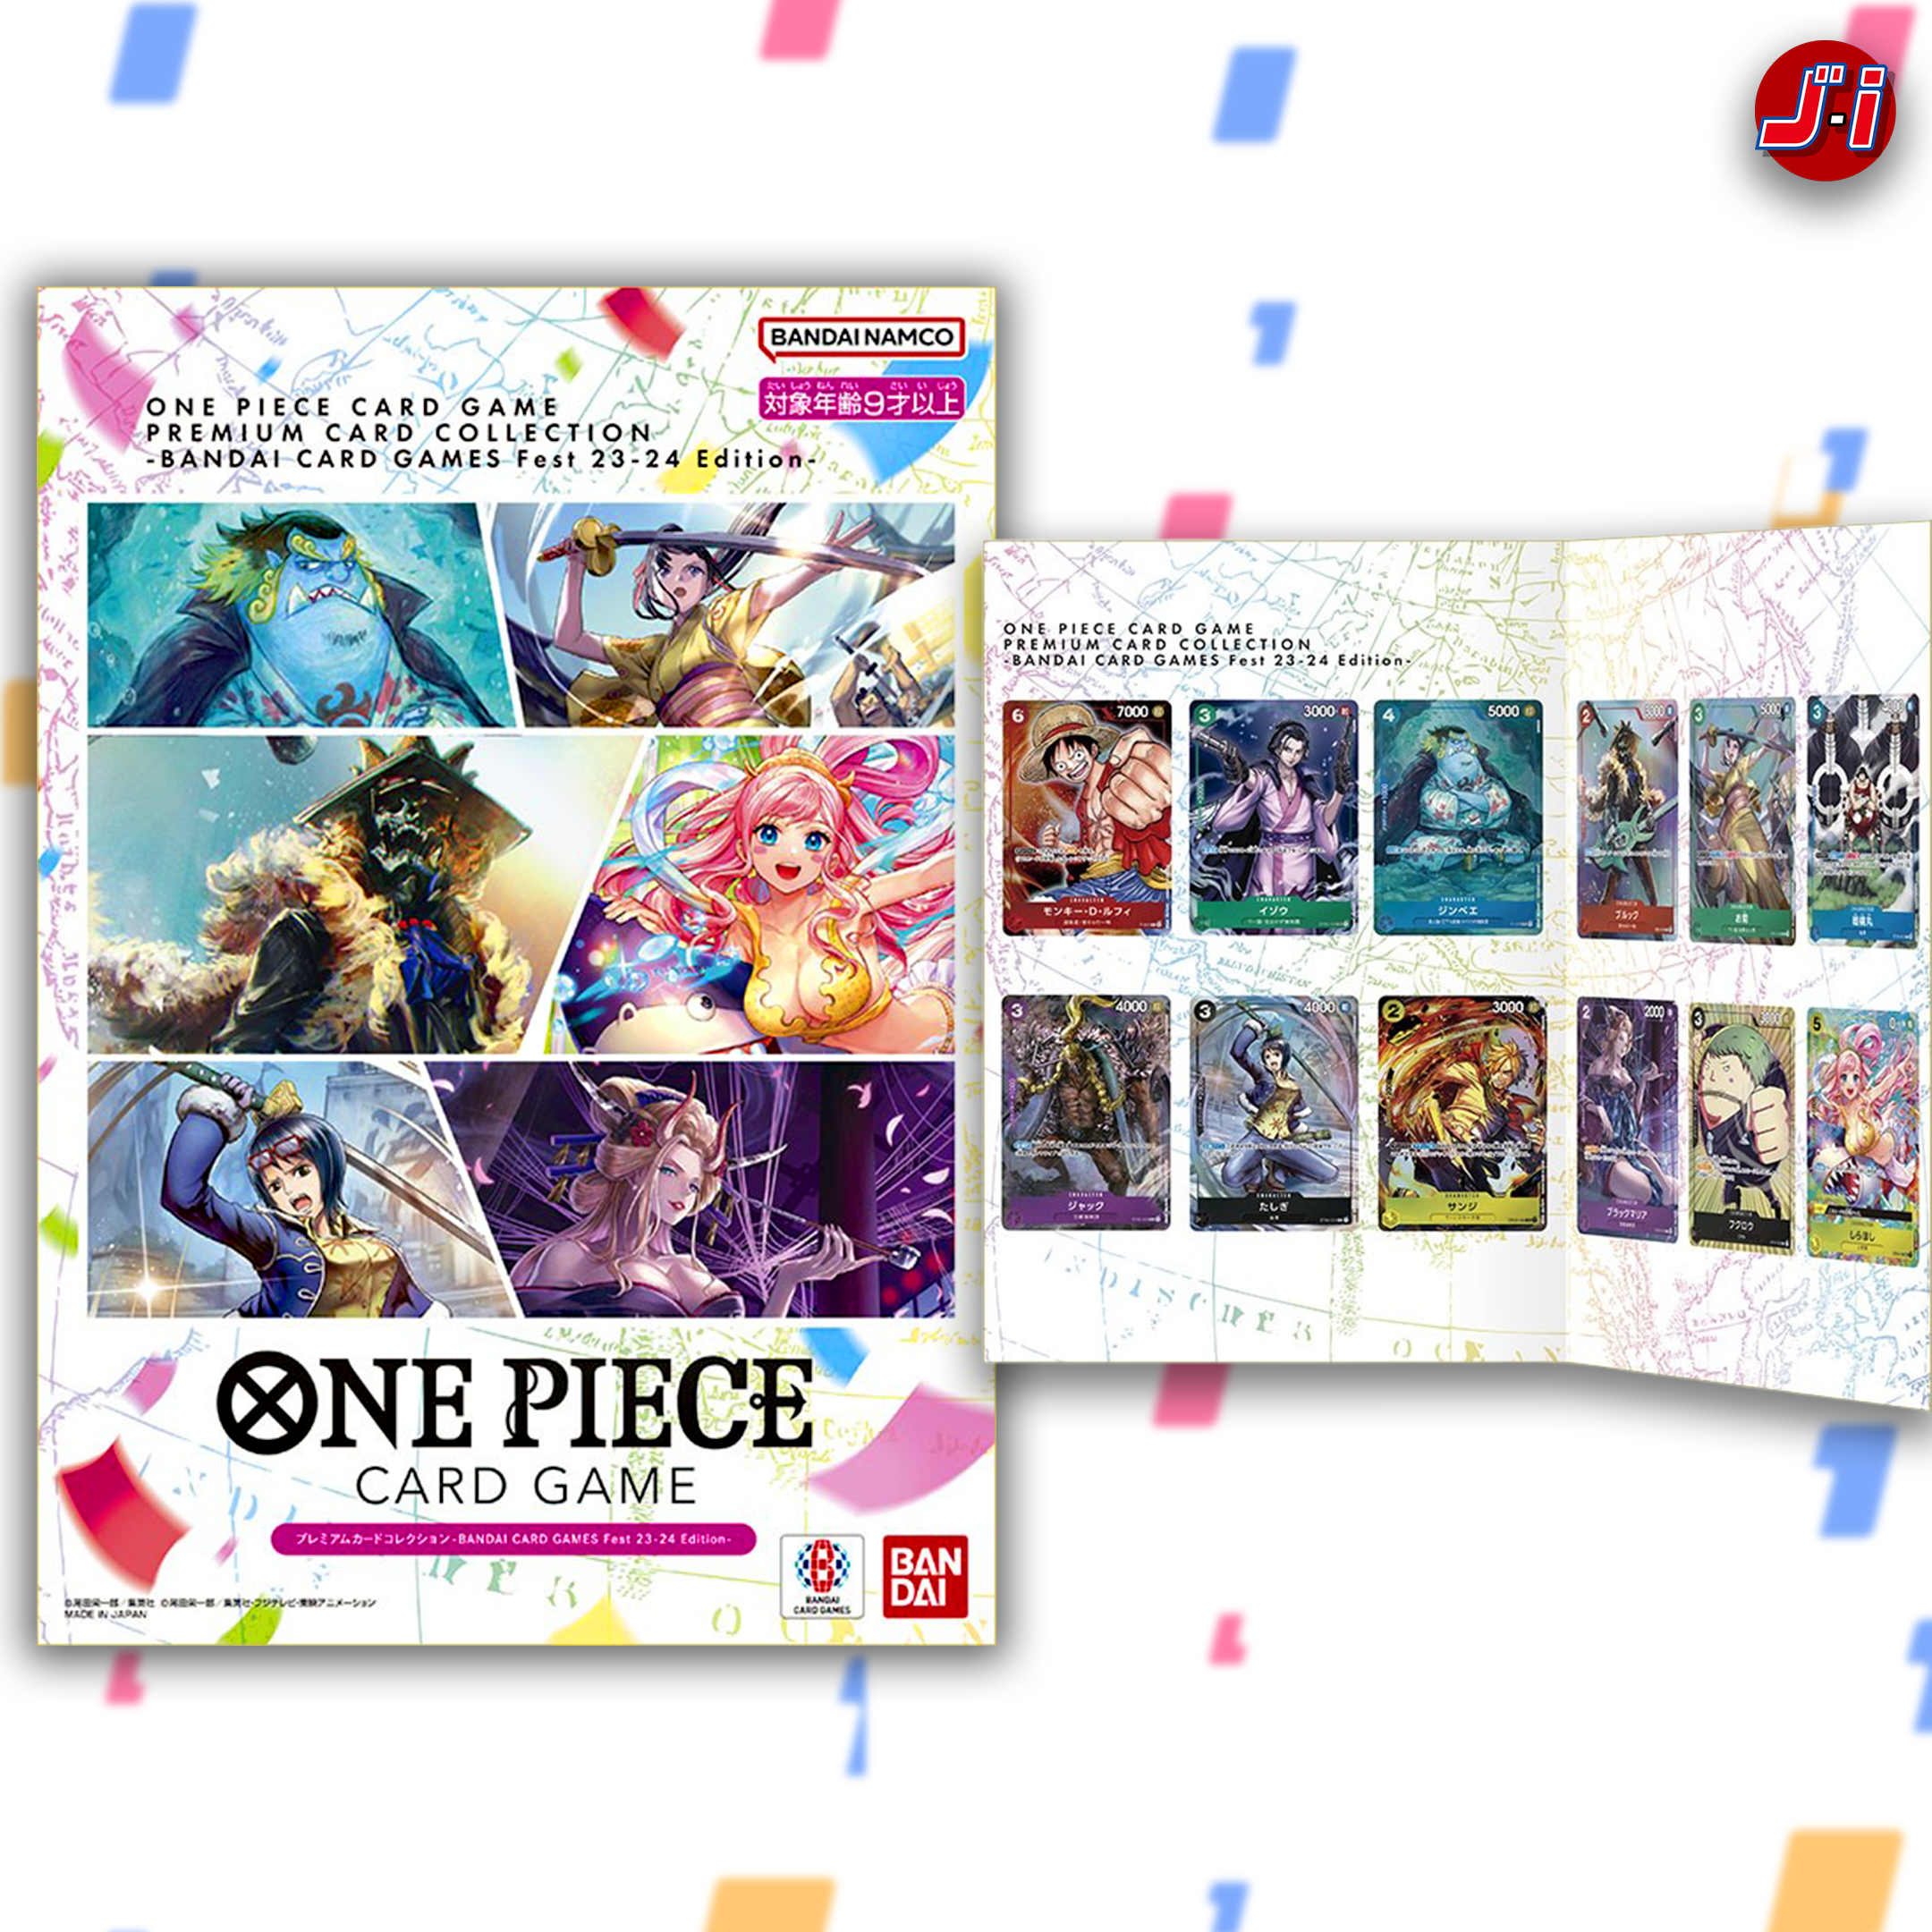 ONE PIECE CARD GAME PREMIUM CARD COLLECTION - BANDAI CARD GAMES FEST 23-24 EDITION